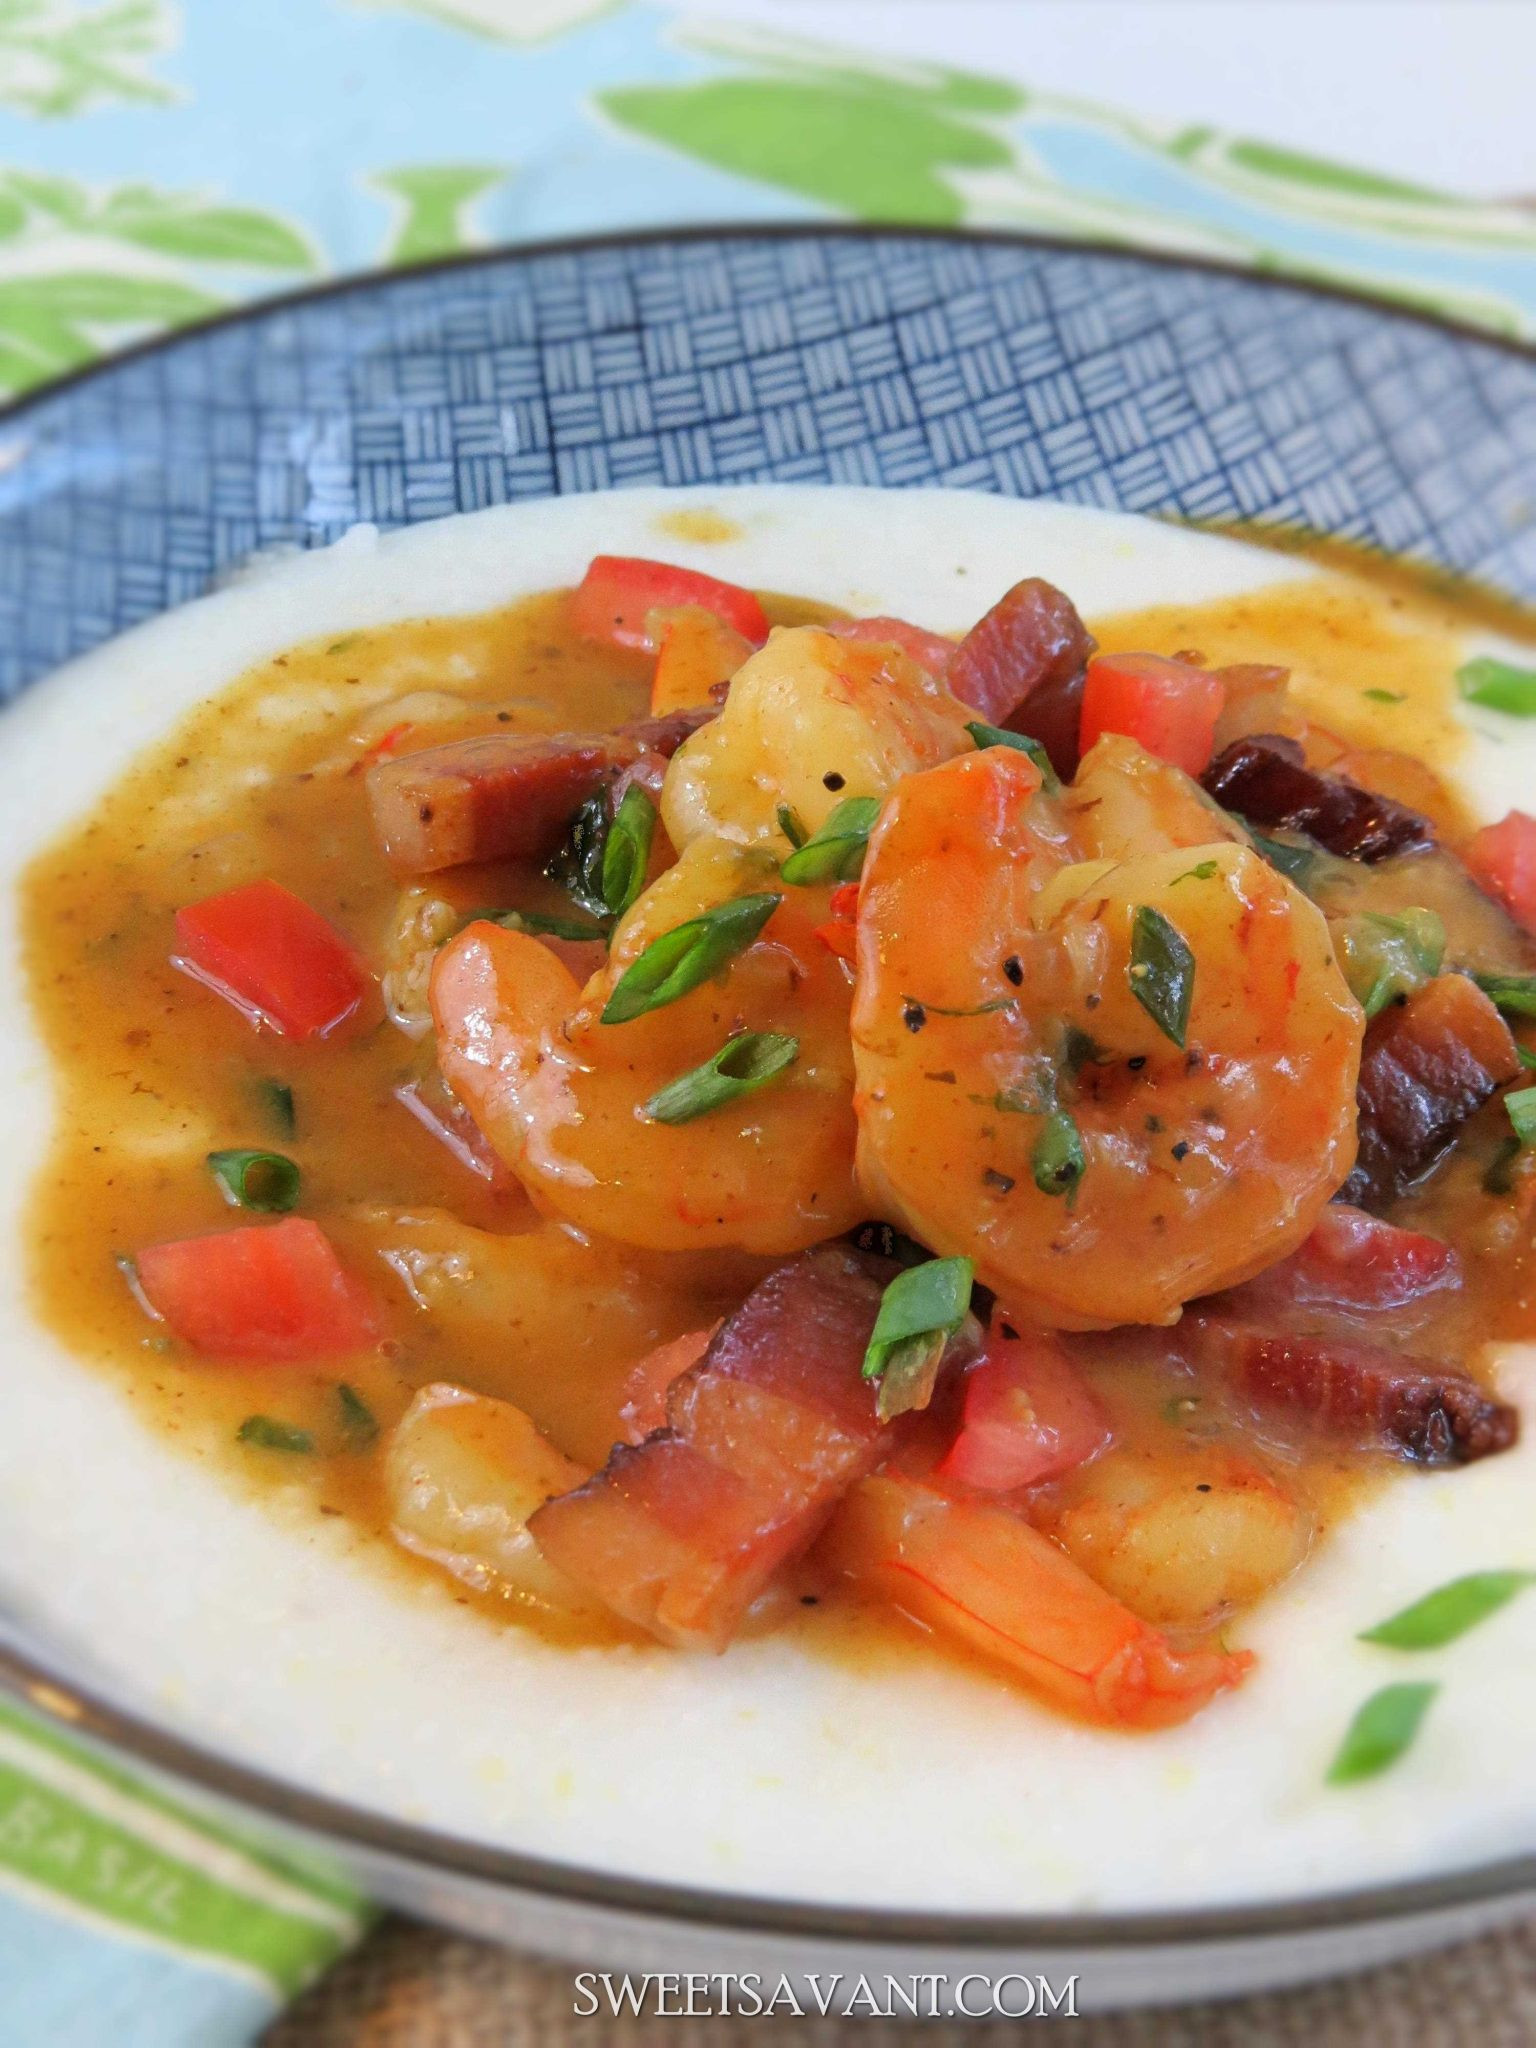 Charleston Shrimp And Grits Recipe
 The best shrimp and grits recipe Charleston style Sweet